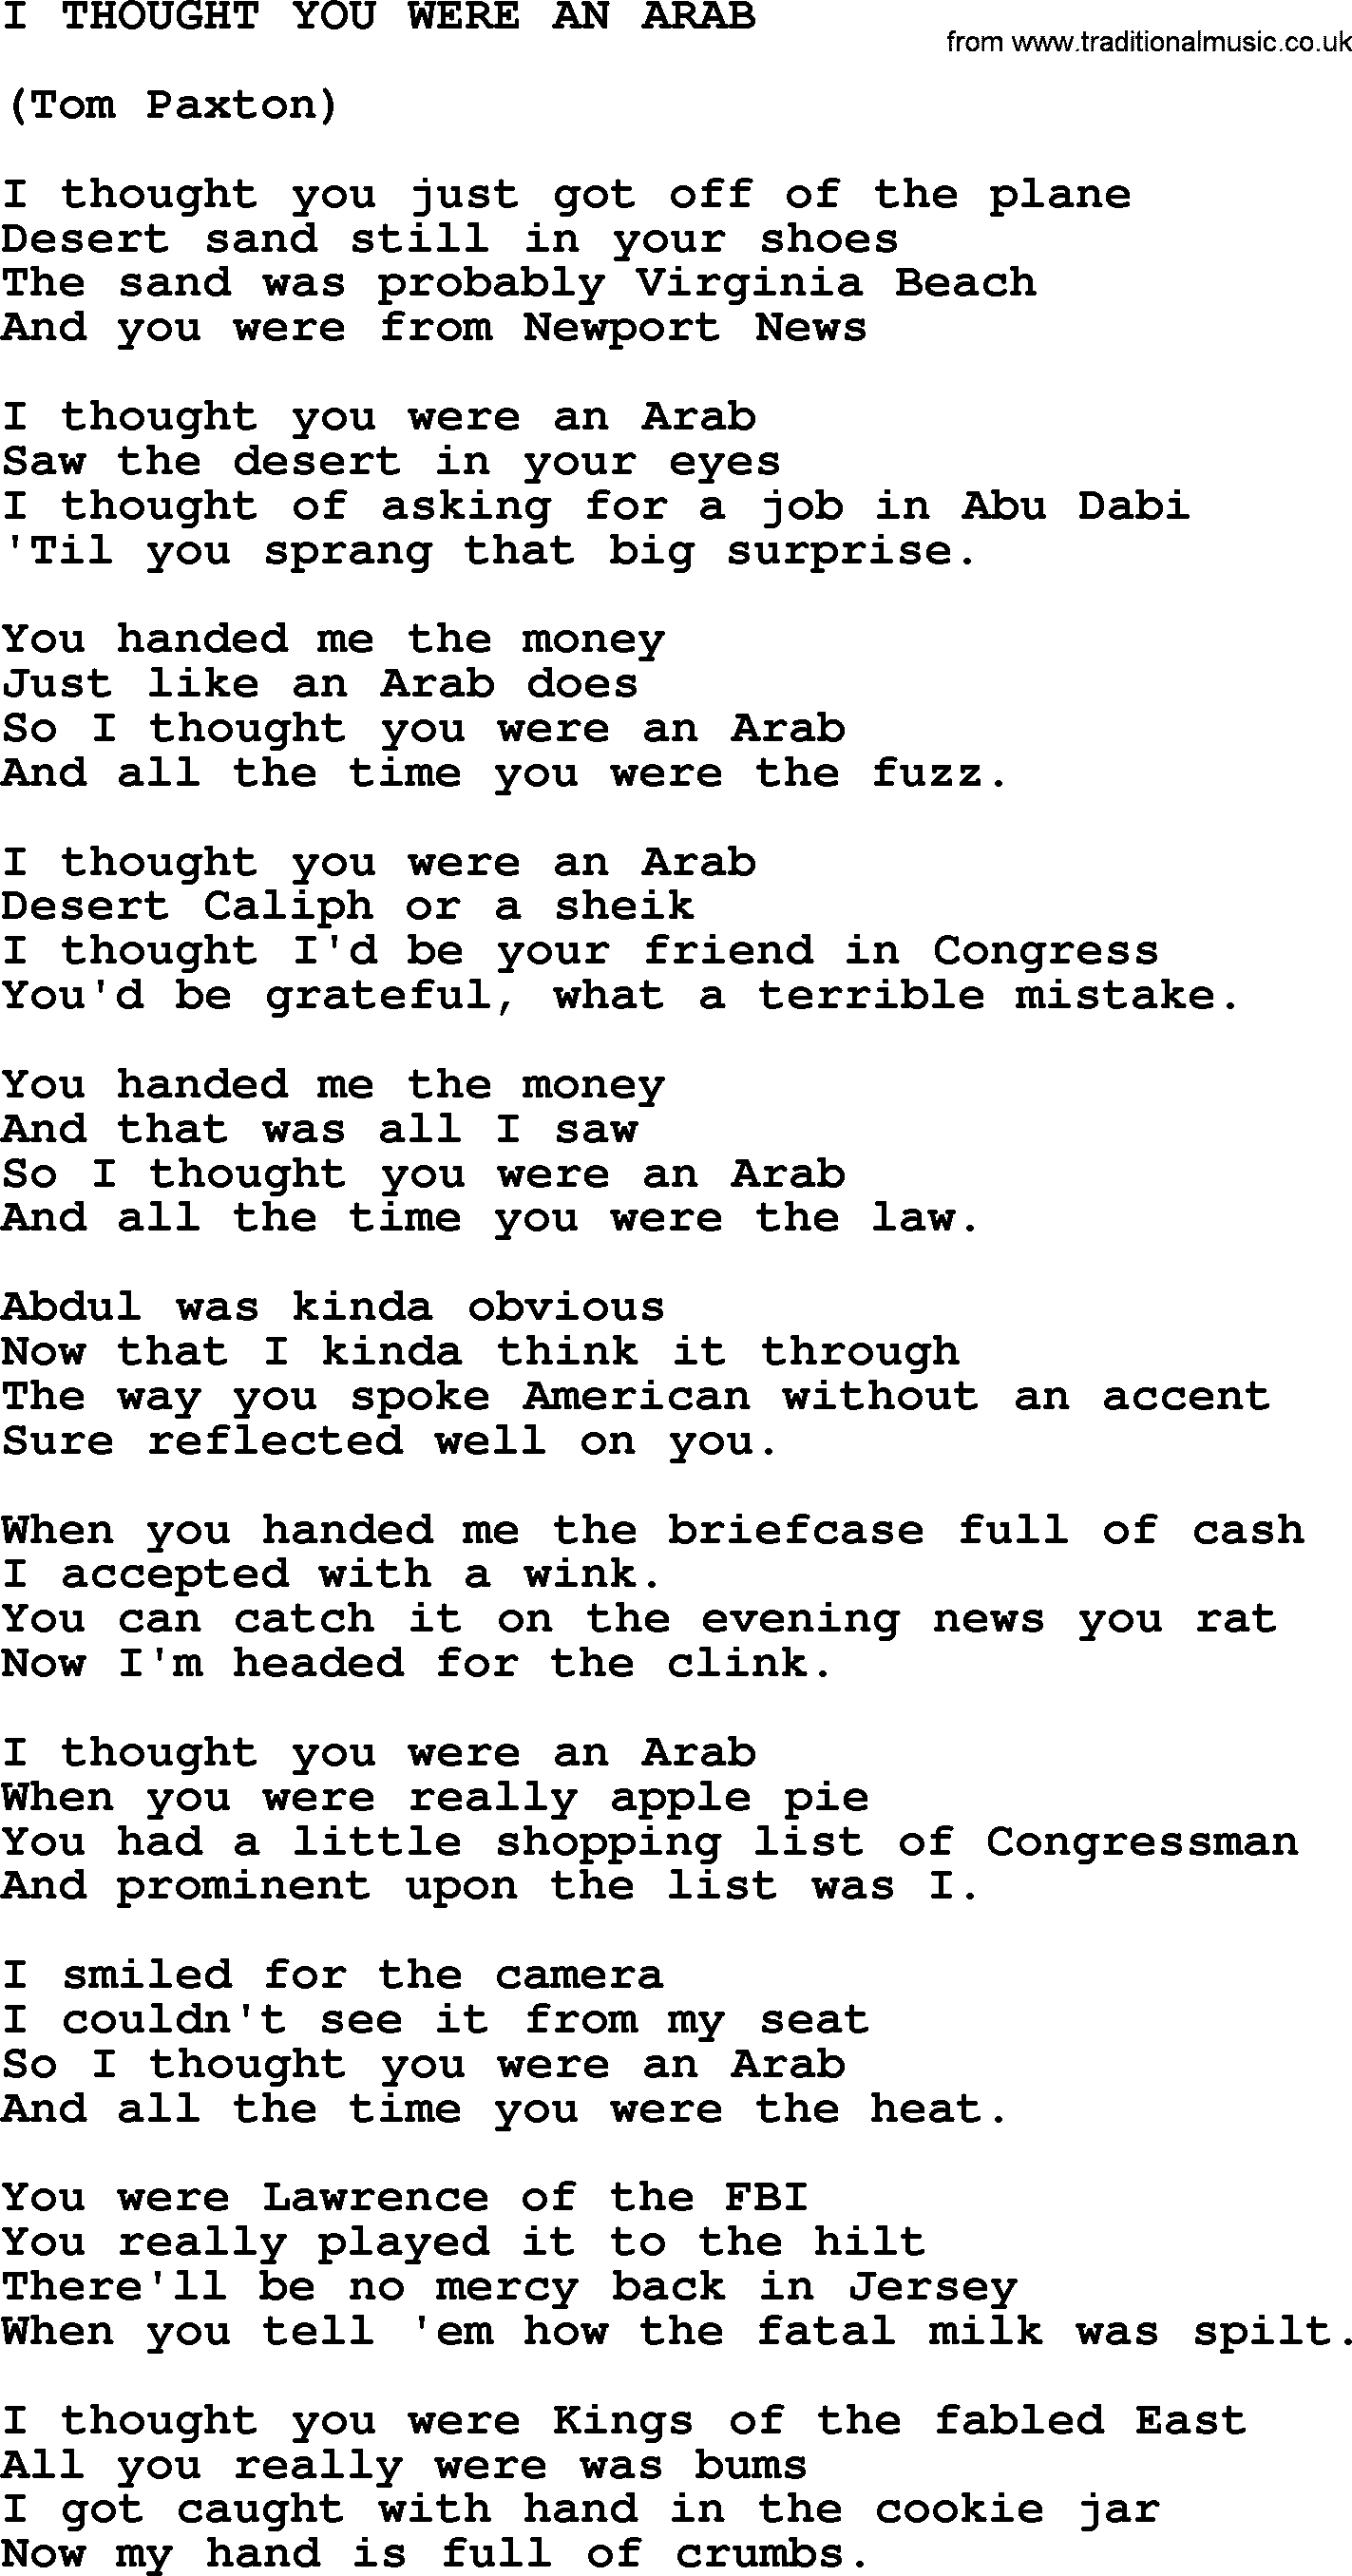 Tom Paxton song: I Thought You Were An Arab, lyrics